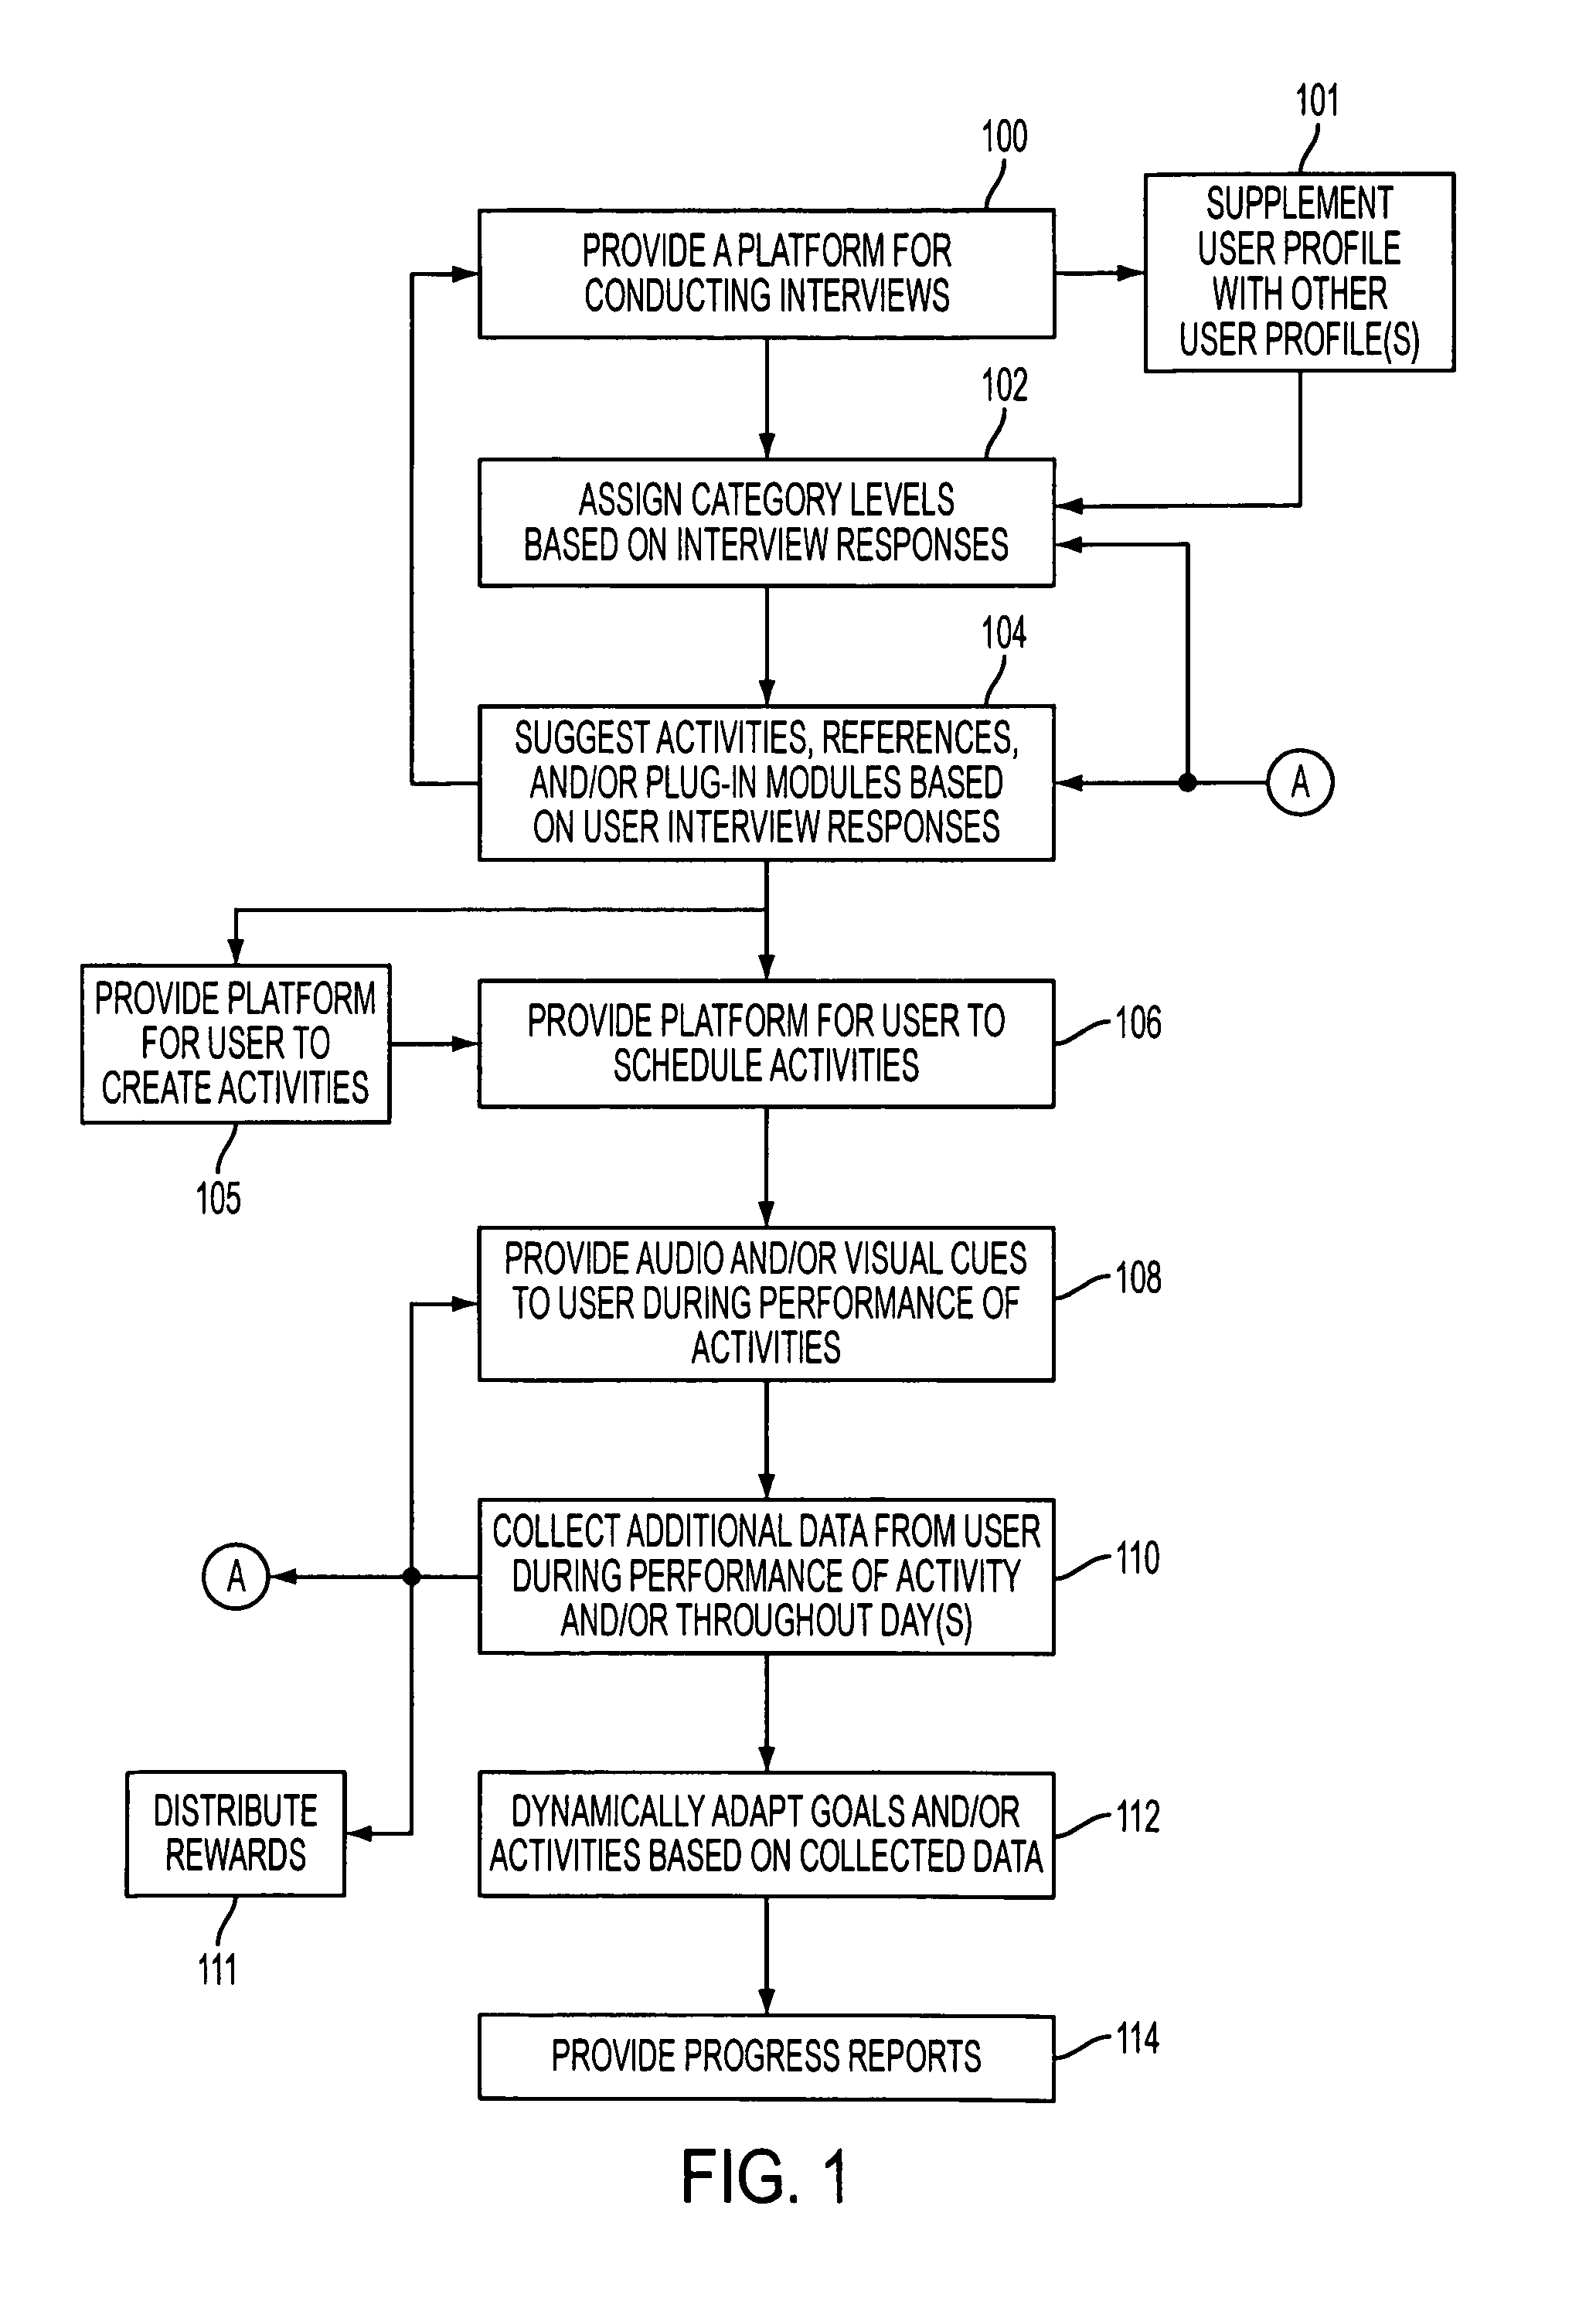 Systems and methods for providing audio and visual cues via a portable electronic device